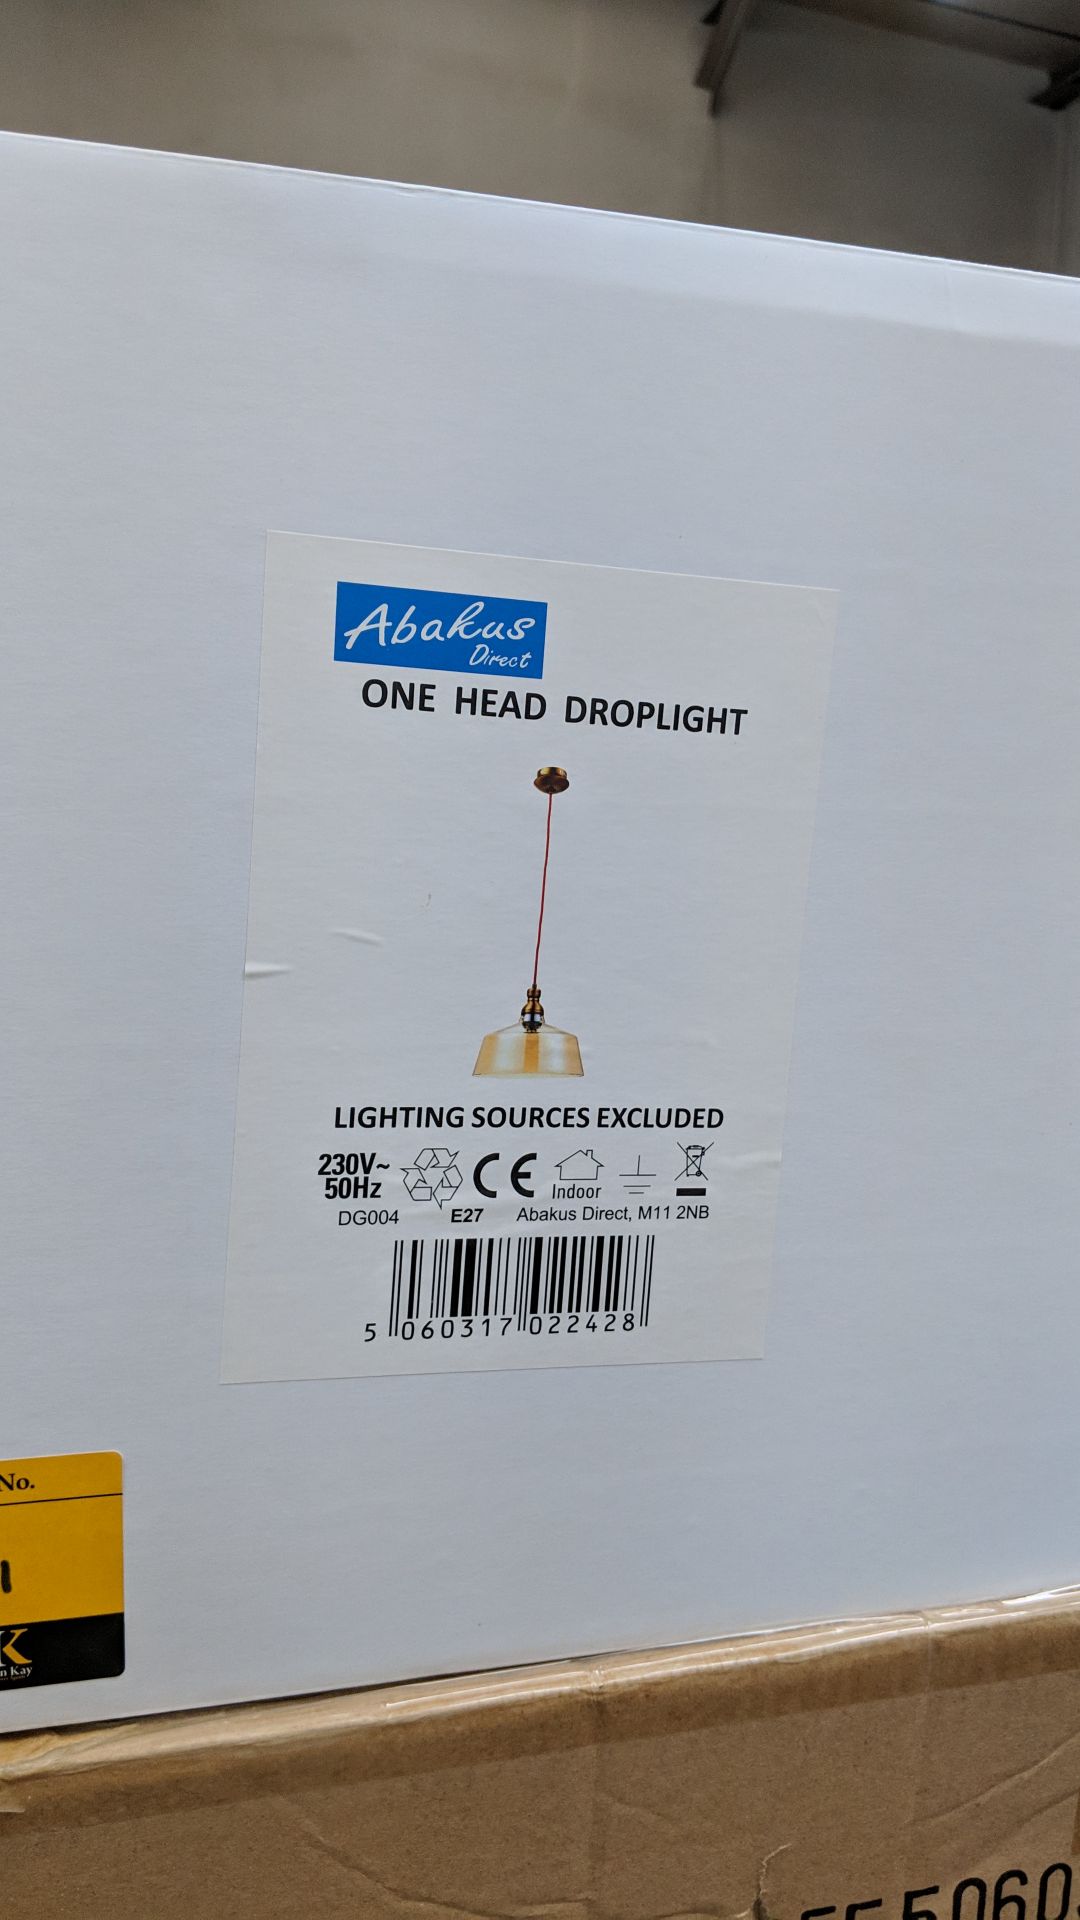 16 off Abakus model DG004 one head droplight light fittings This lot is one of a number of lots in - Image 2 of 3